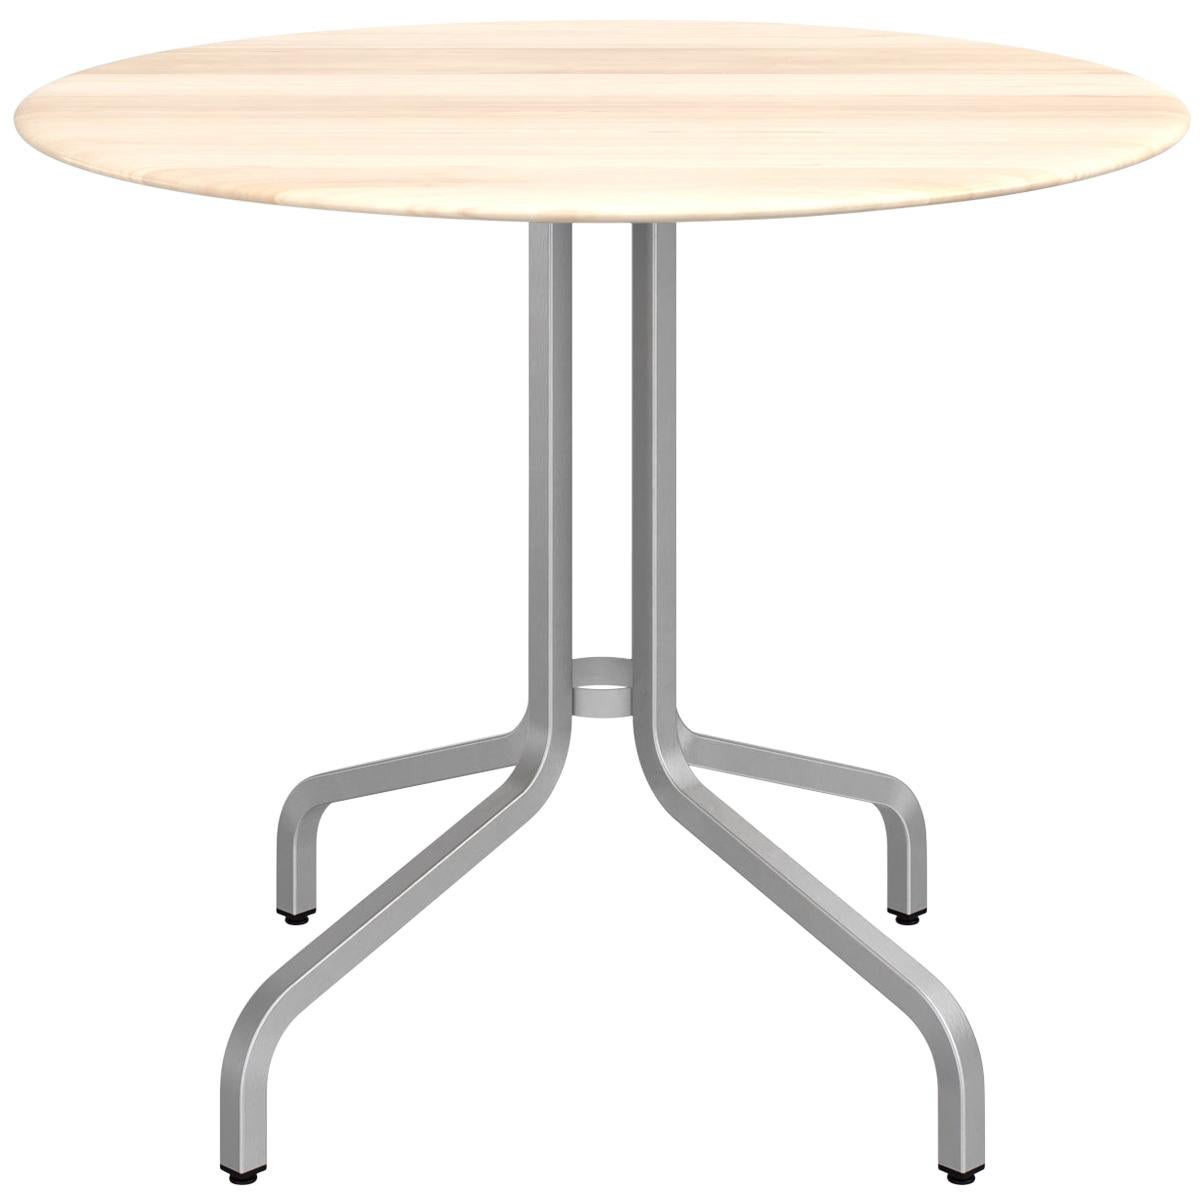 Emeco 1 Inch Large Round Aluminum Cafe Table with Wood Top by Jasper Morrison For Sale